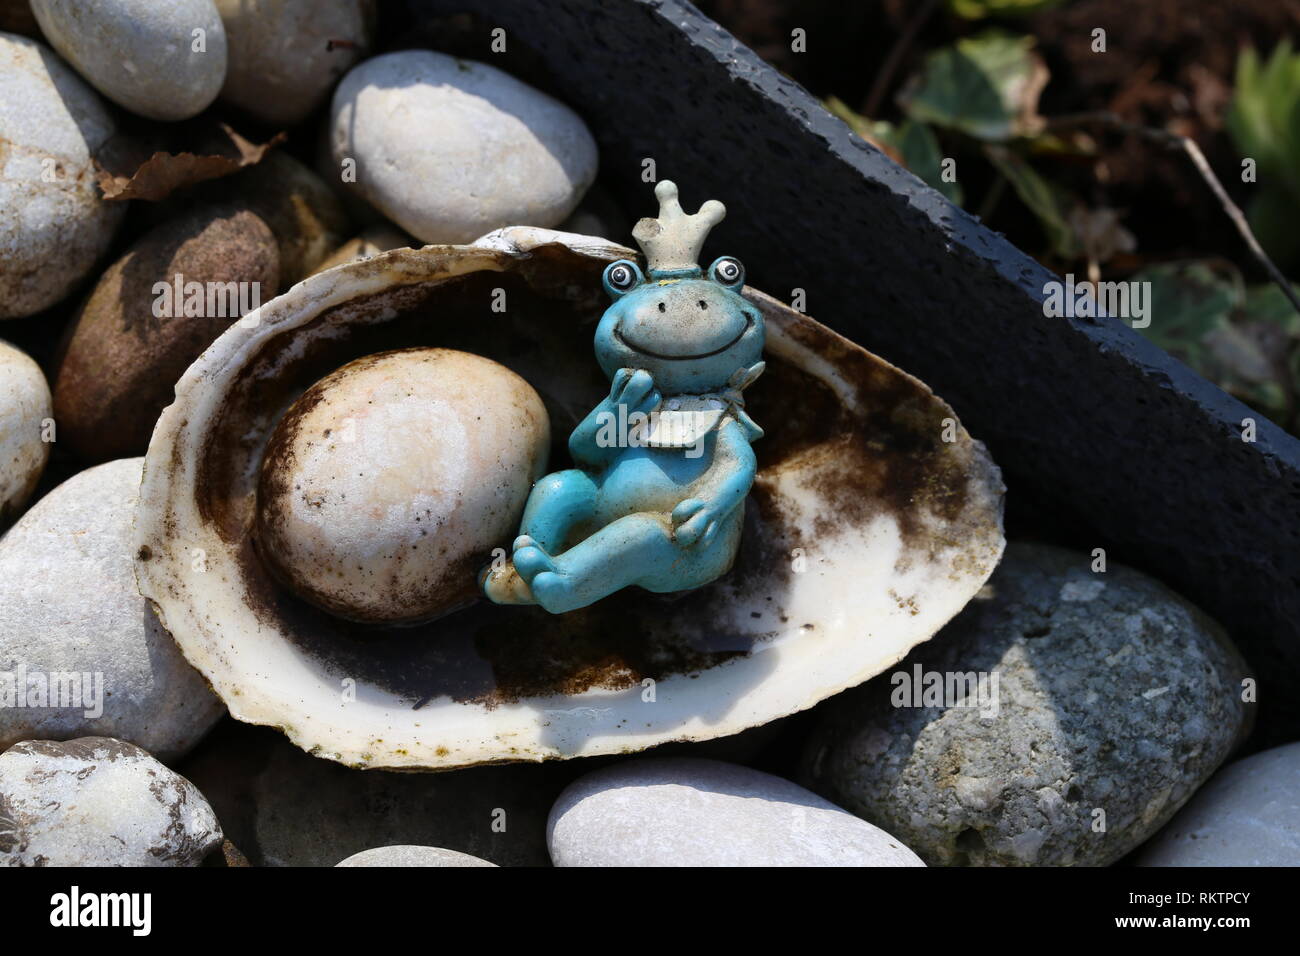 Princess Frog / Decoration at the garden pond Stock Photo